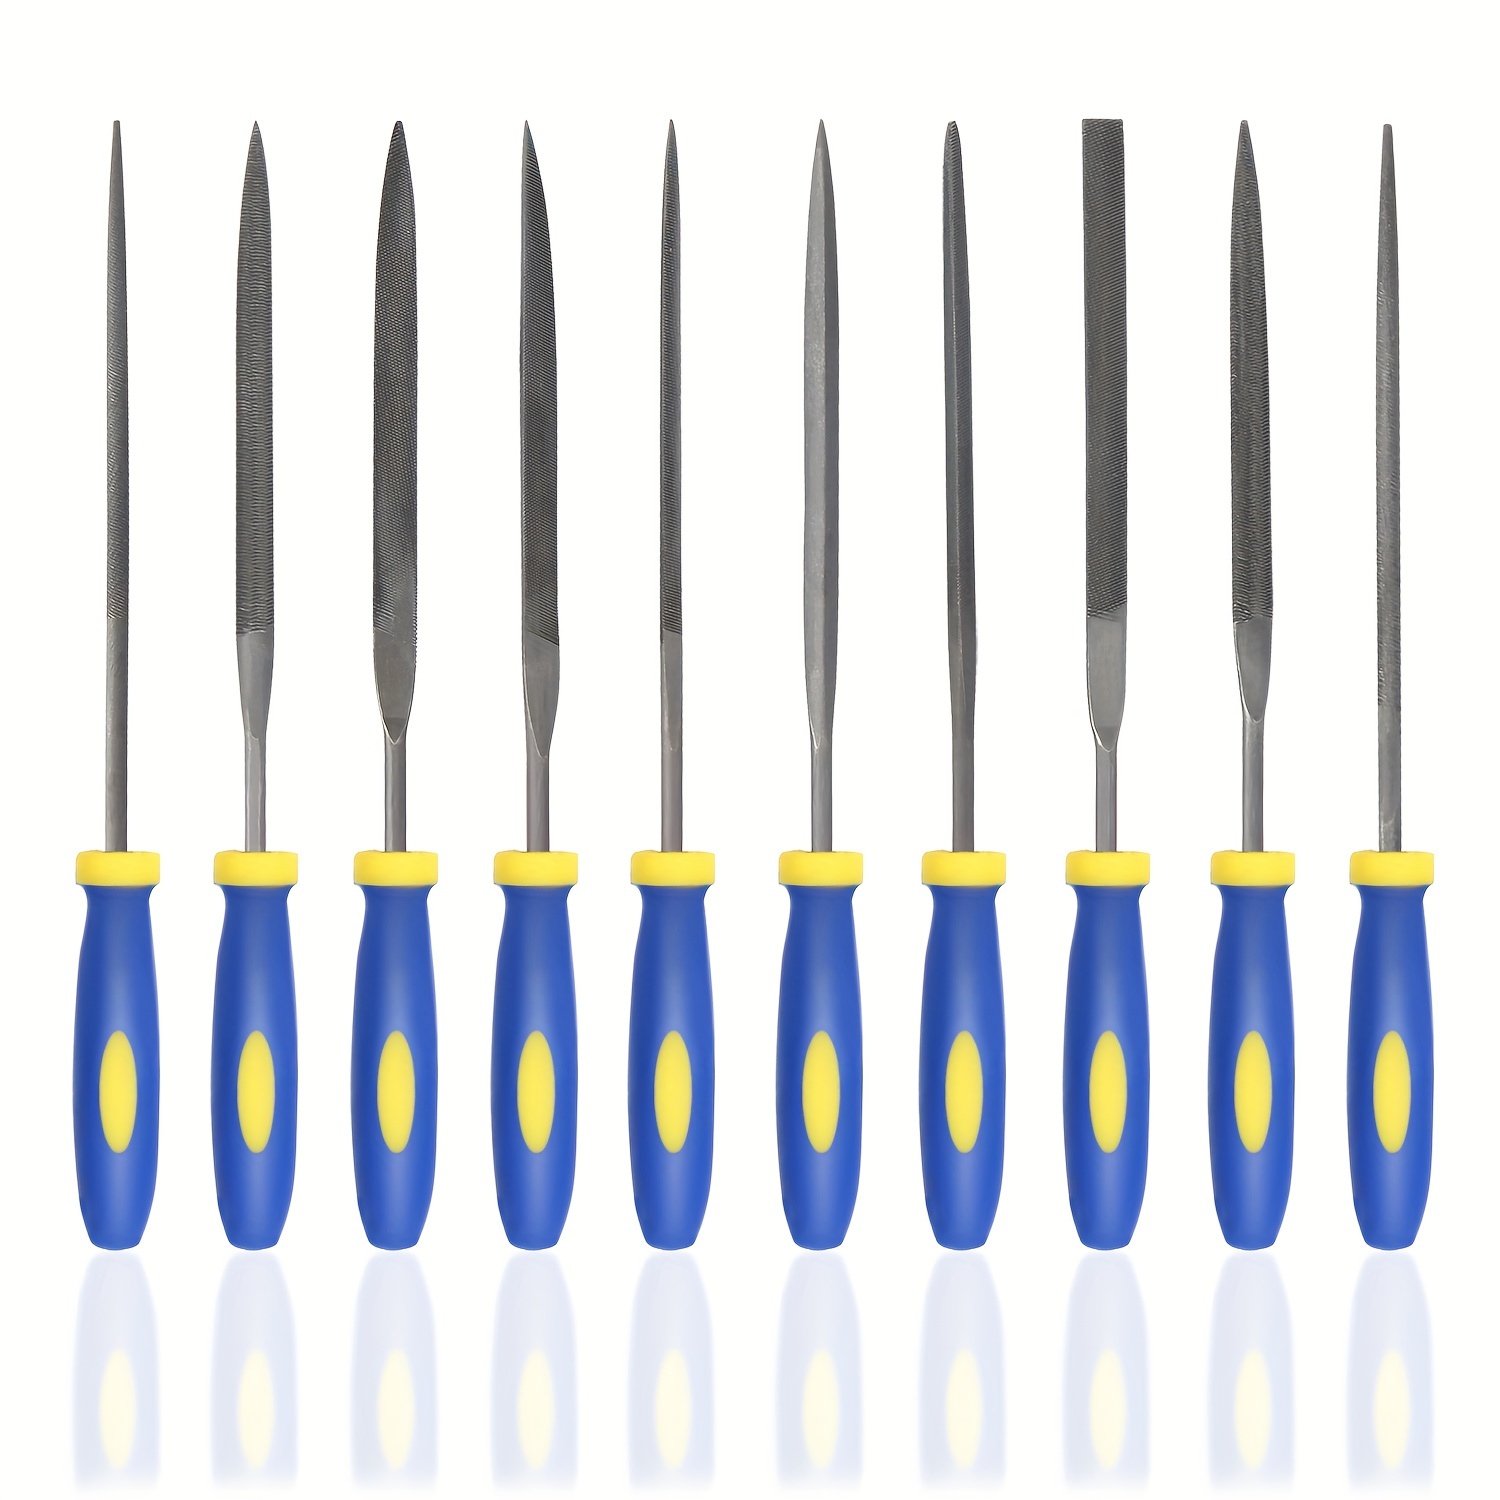 

10pcs Needle File Set - High Carbon Steel With Non-slip Handles - Perfect For Wood, Plastic, Model, Jewelry, Musical Instrument & Diy Projects (6 Total Length)